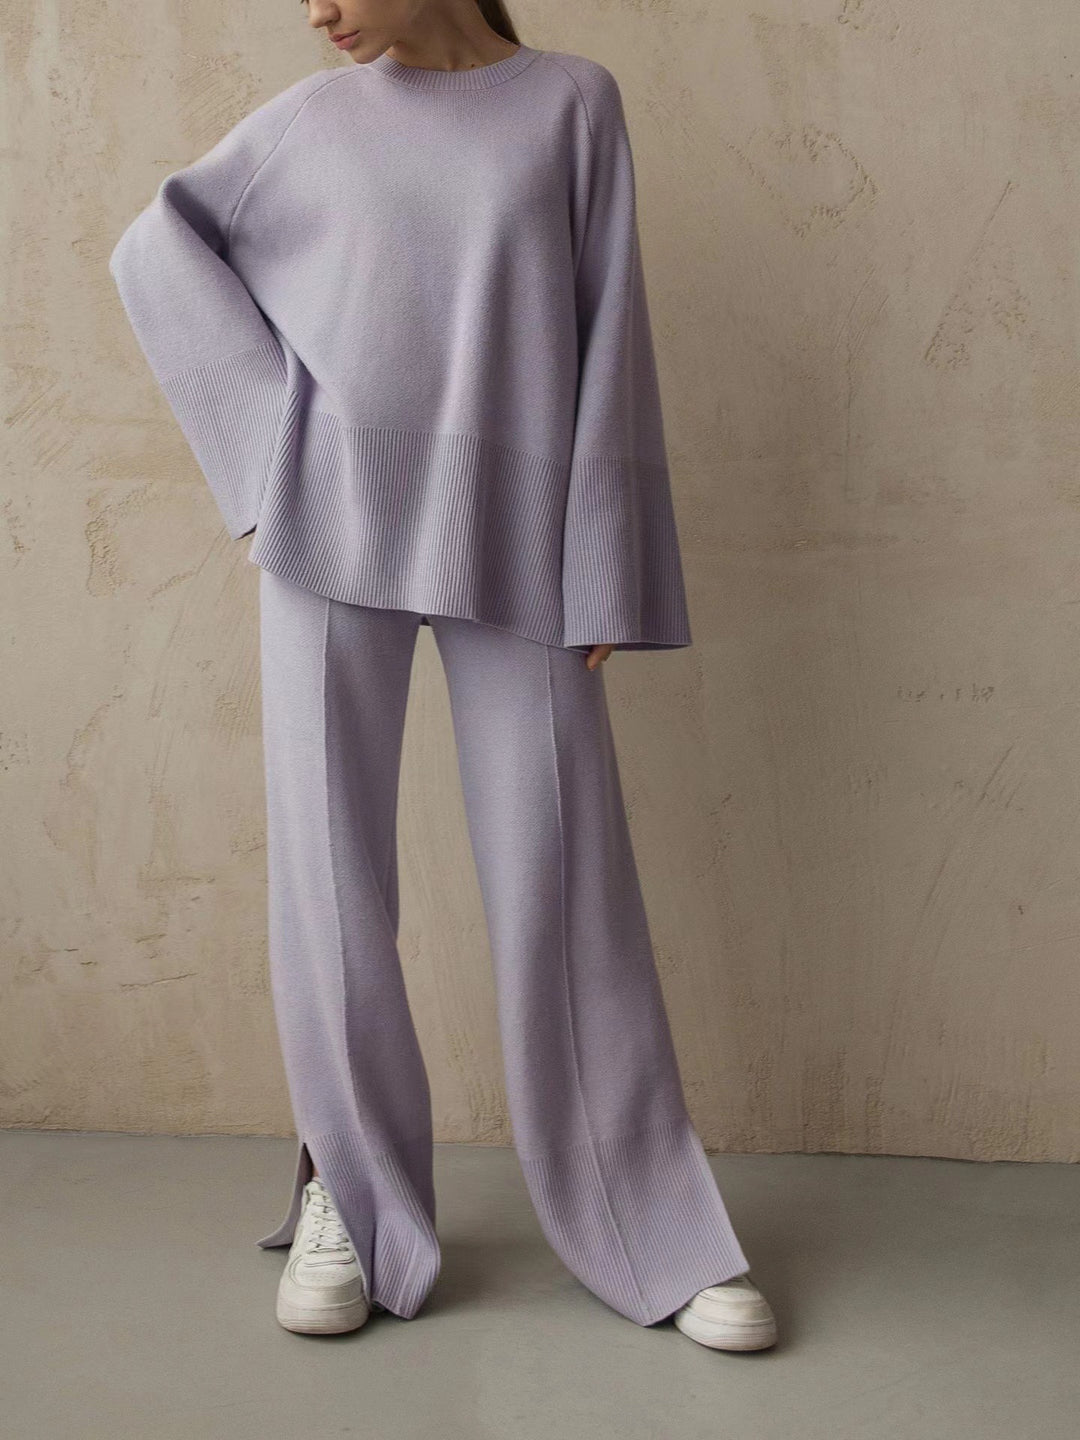 Loose Knitting Suit Autumn Winter Flared Sleeves round Neck Slit Loose Suit